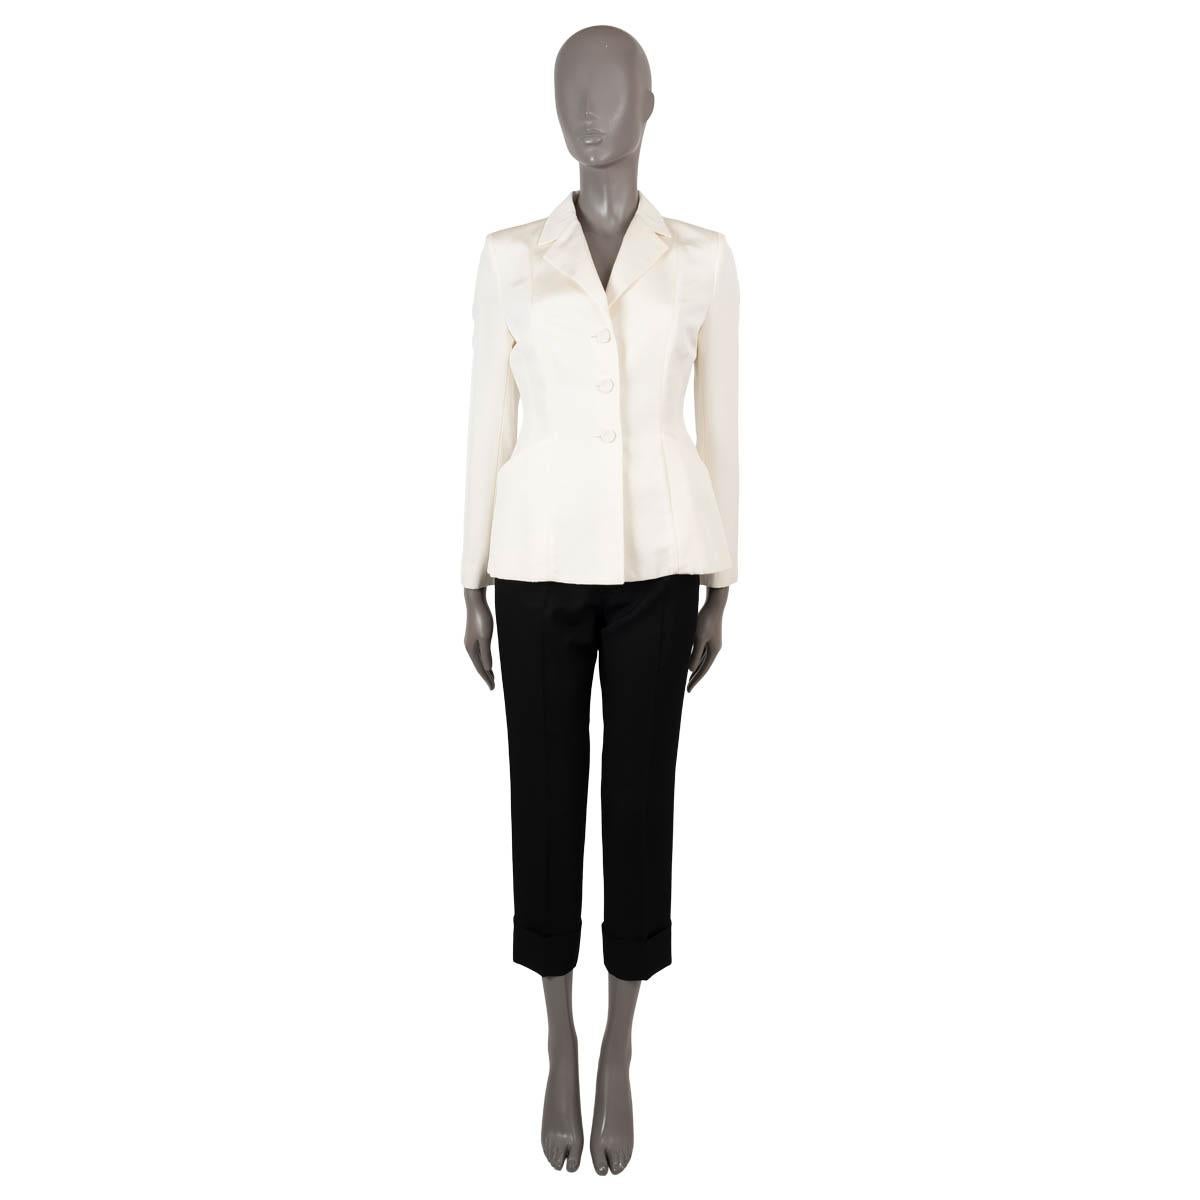 100% authentic Christian Dior 30 Montaigne Bar jacket in ivory grosgrain cotton (63%) and silk (37%). Features a tailored, yet supple silhouette with delicately highlight waist, notch lapels and welt pockets. Closes with fabric covered buttons on